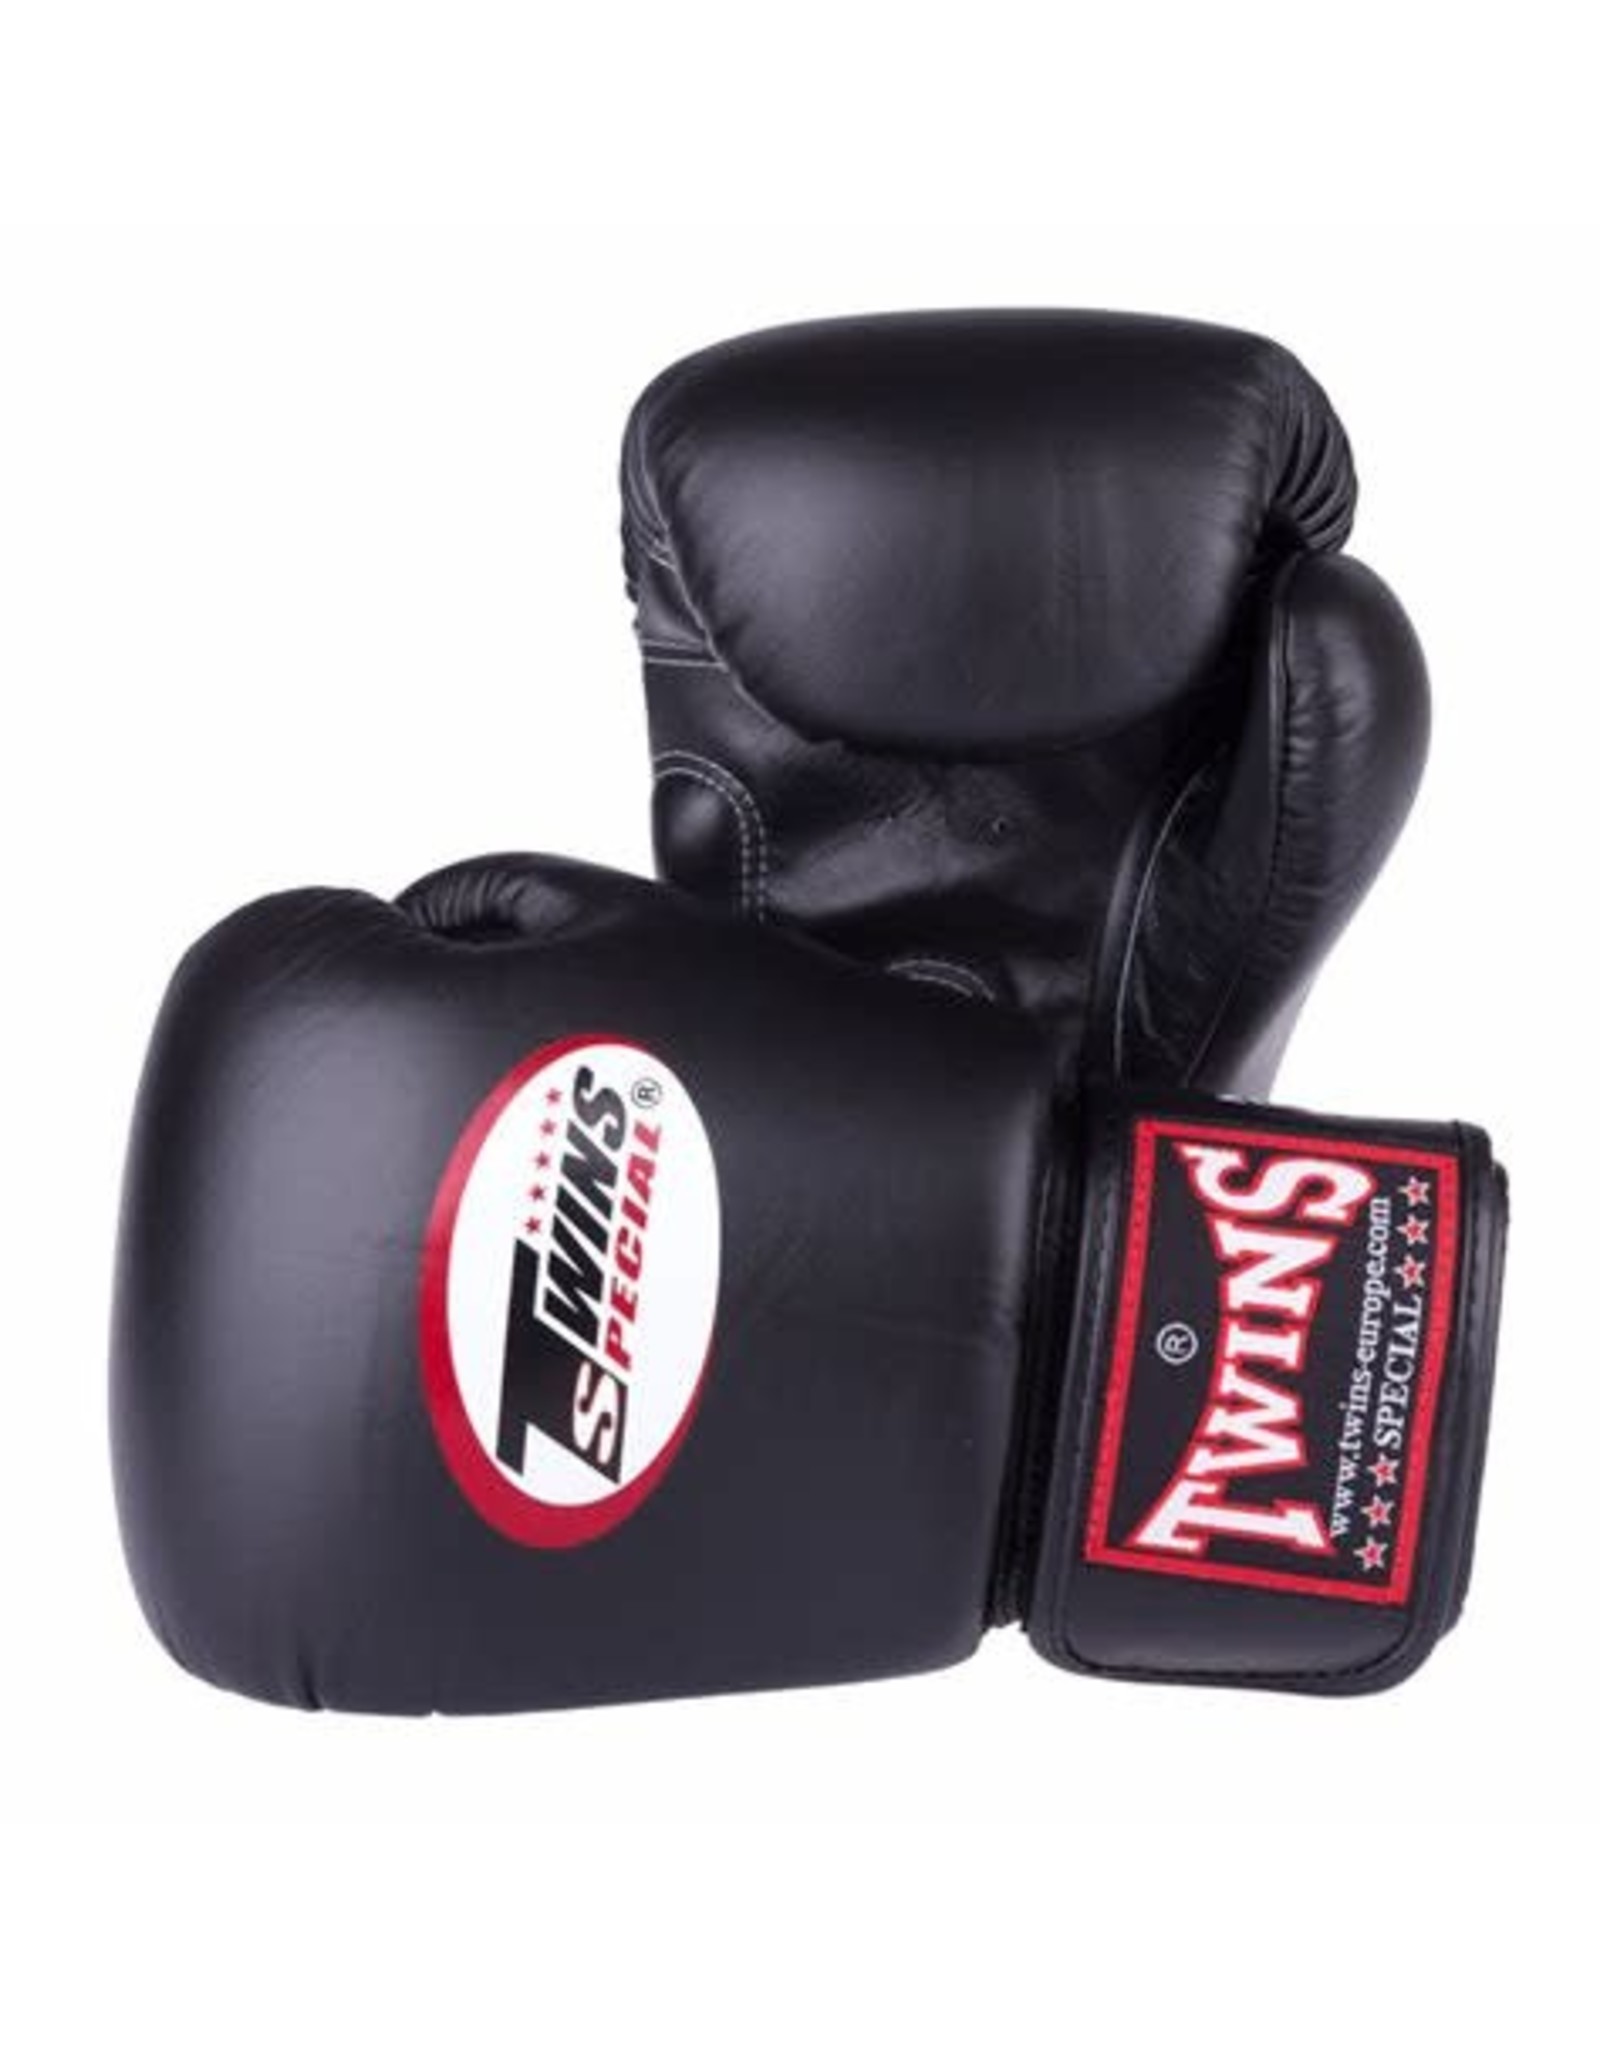 Boxing Gloves - Twins - 10, 12 oz.